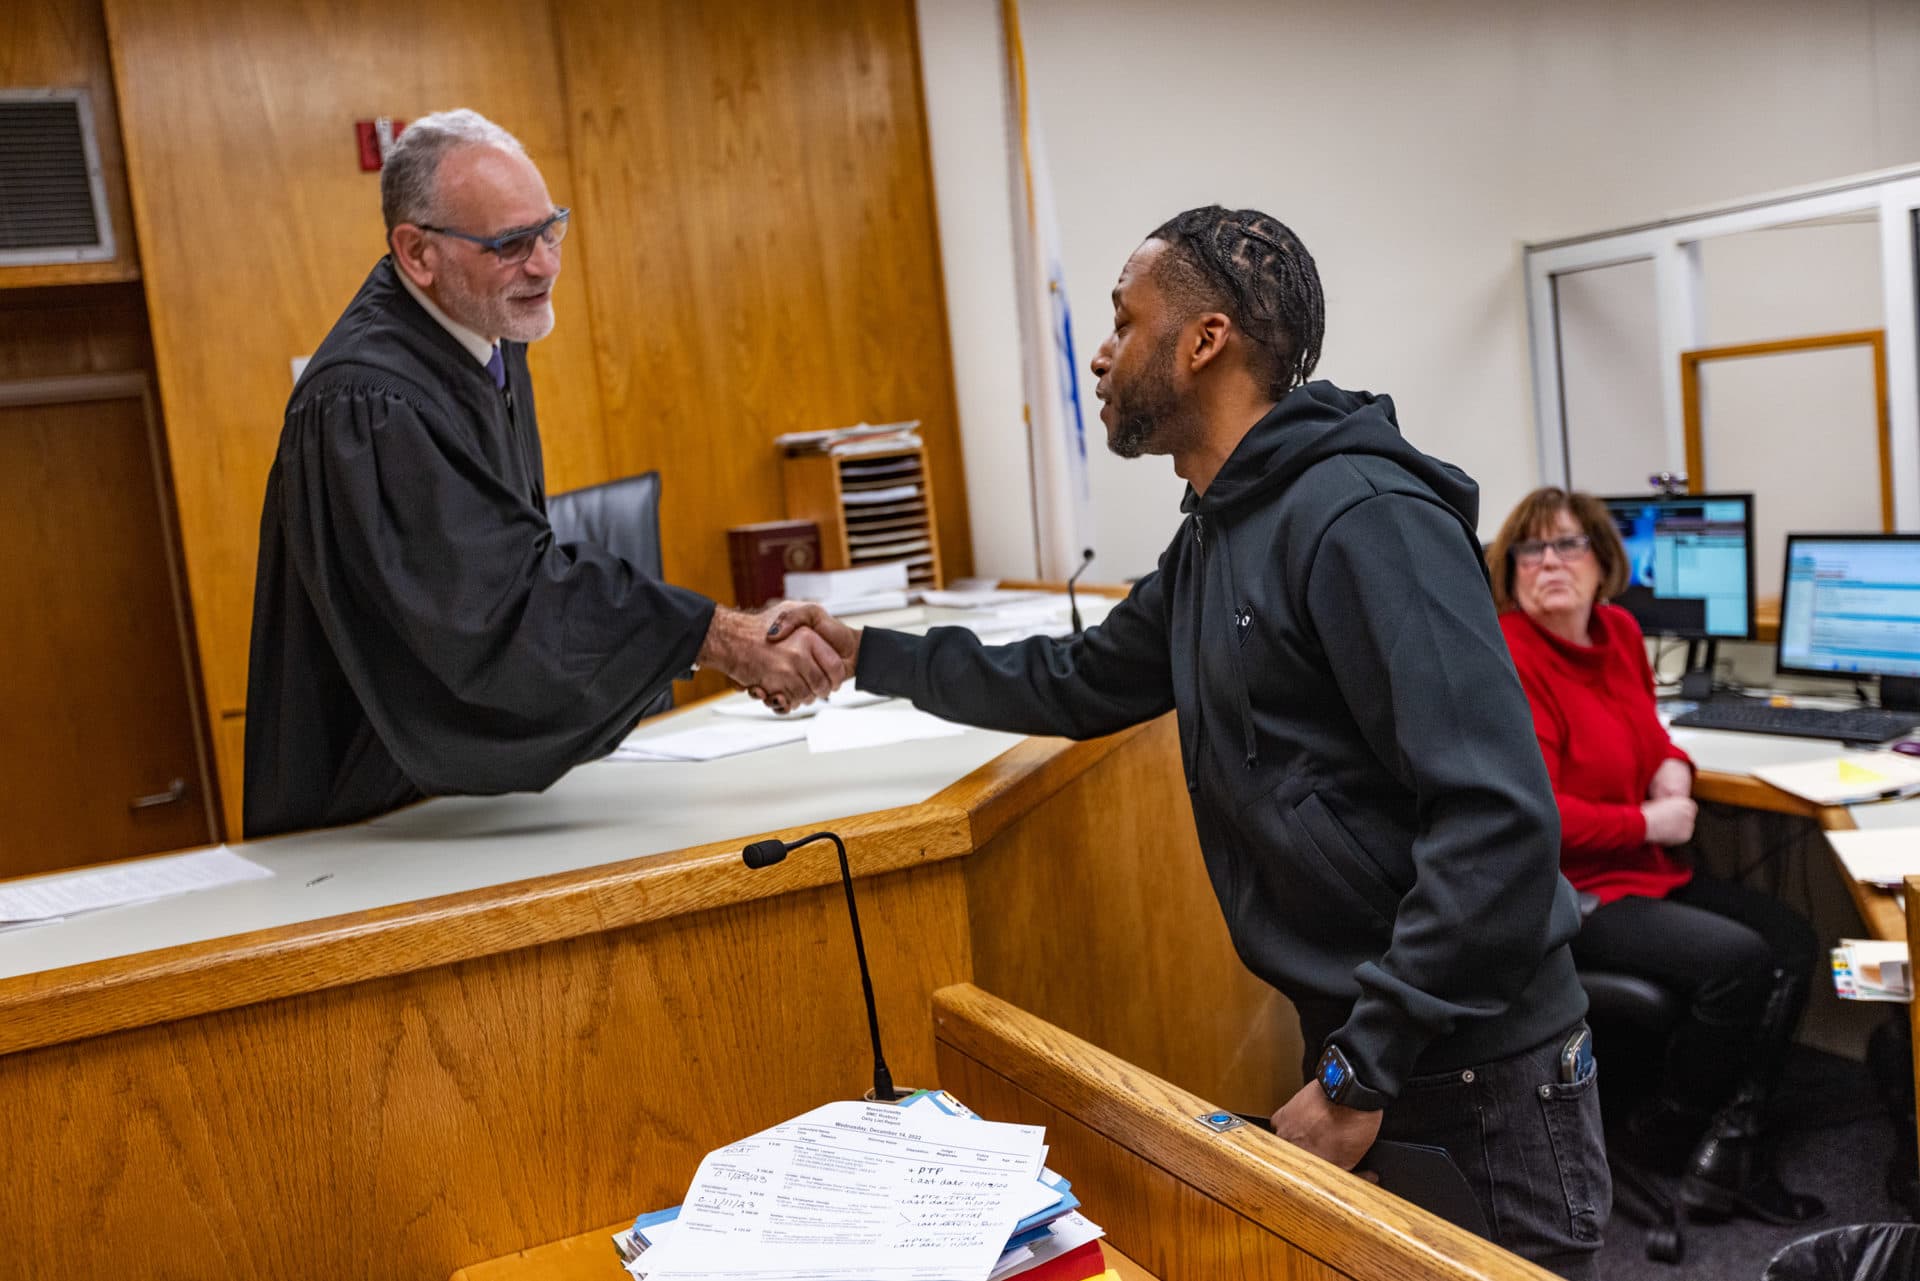 Justice David Weingarten shakes the hand of Kamari Hope, congratulating him upon his completion of the Boston Outpatient Assisted Treatment Program during a hearing at Roxbury District Court. (Jesse Costa/WBUR)